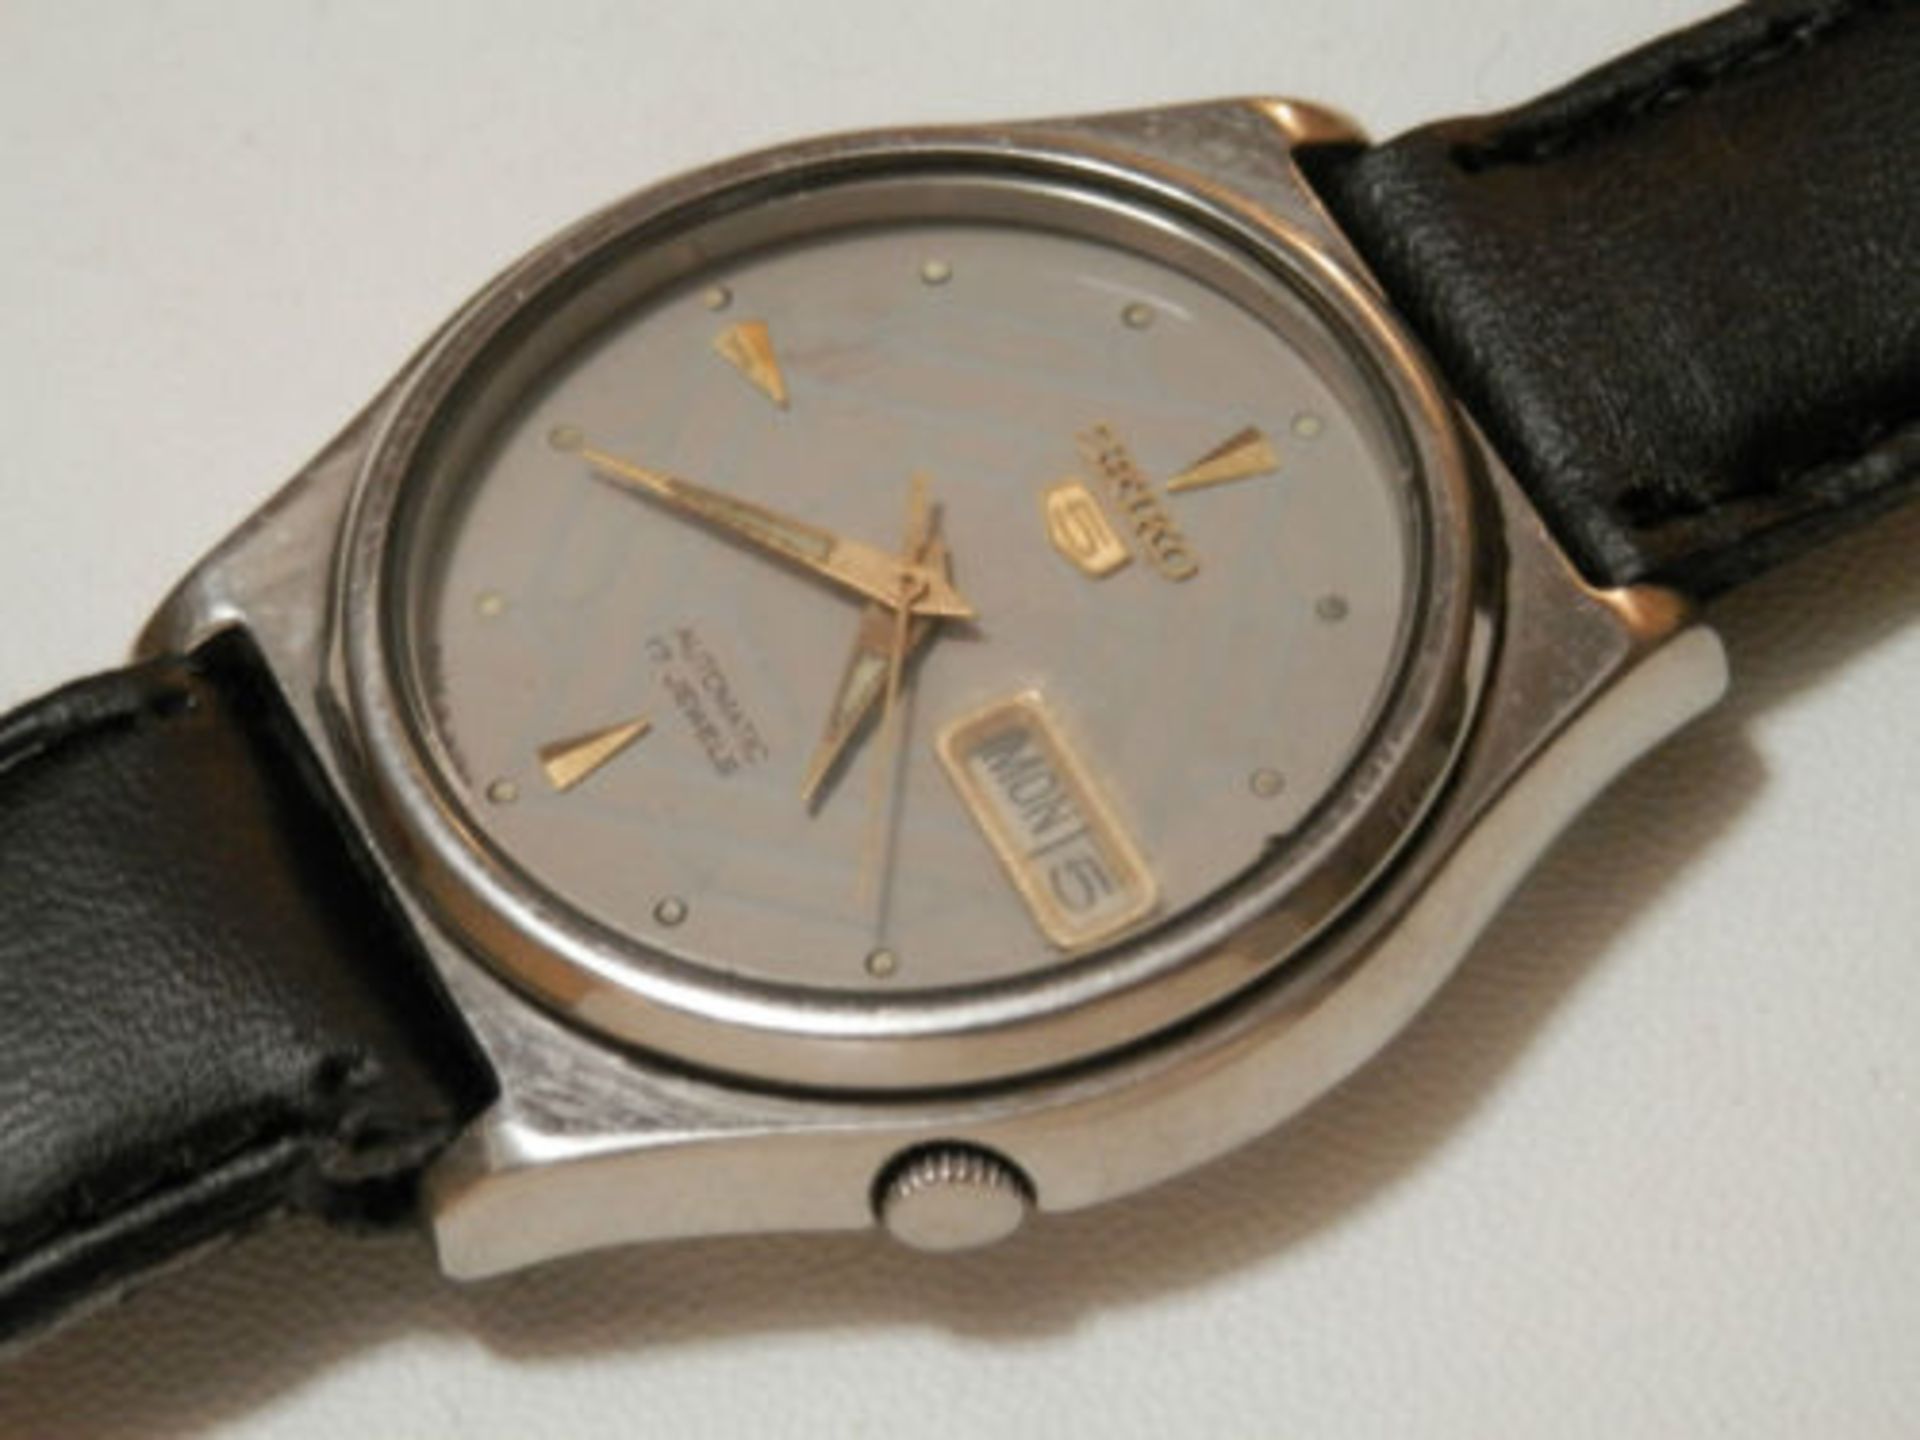 1984 WORKING SEIKO 7009 AUTOMATIC 17 JEWEL DAY/DATE WATCH, STAINLESS CASE. - Image 10 of 13